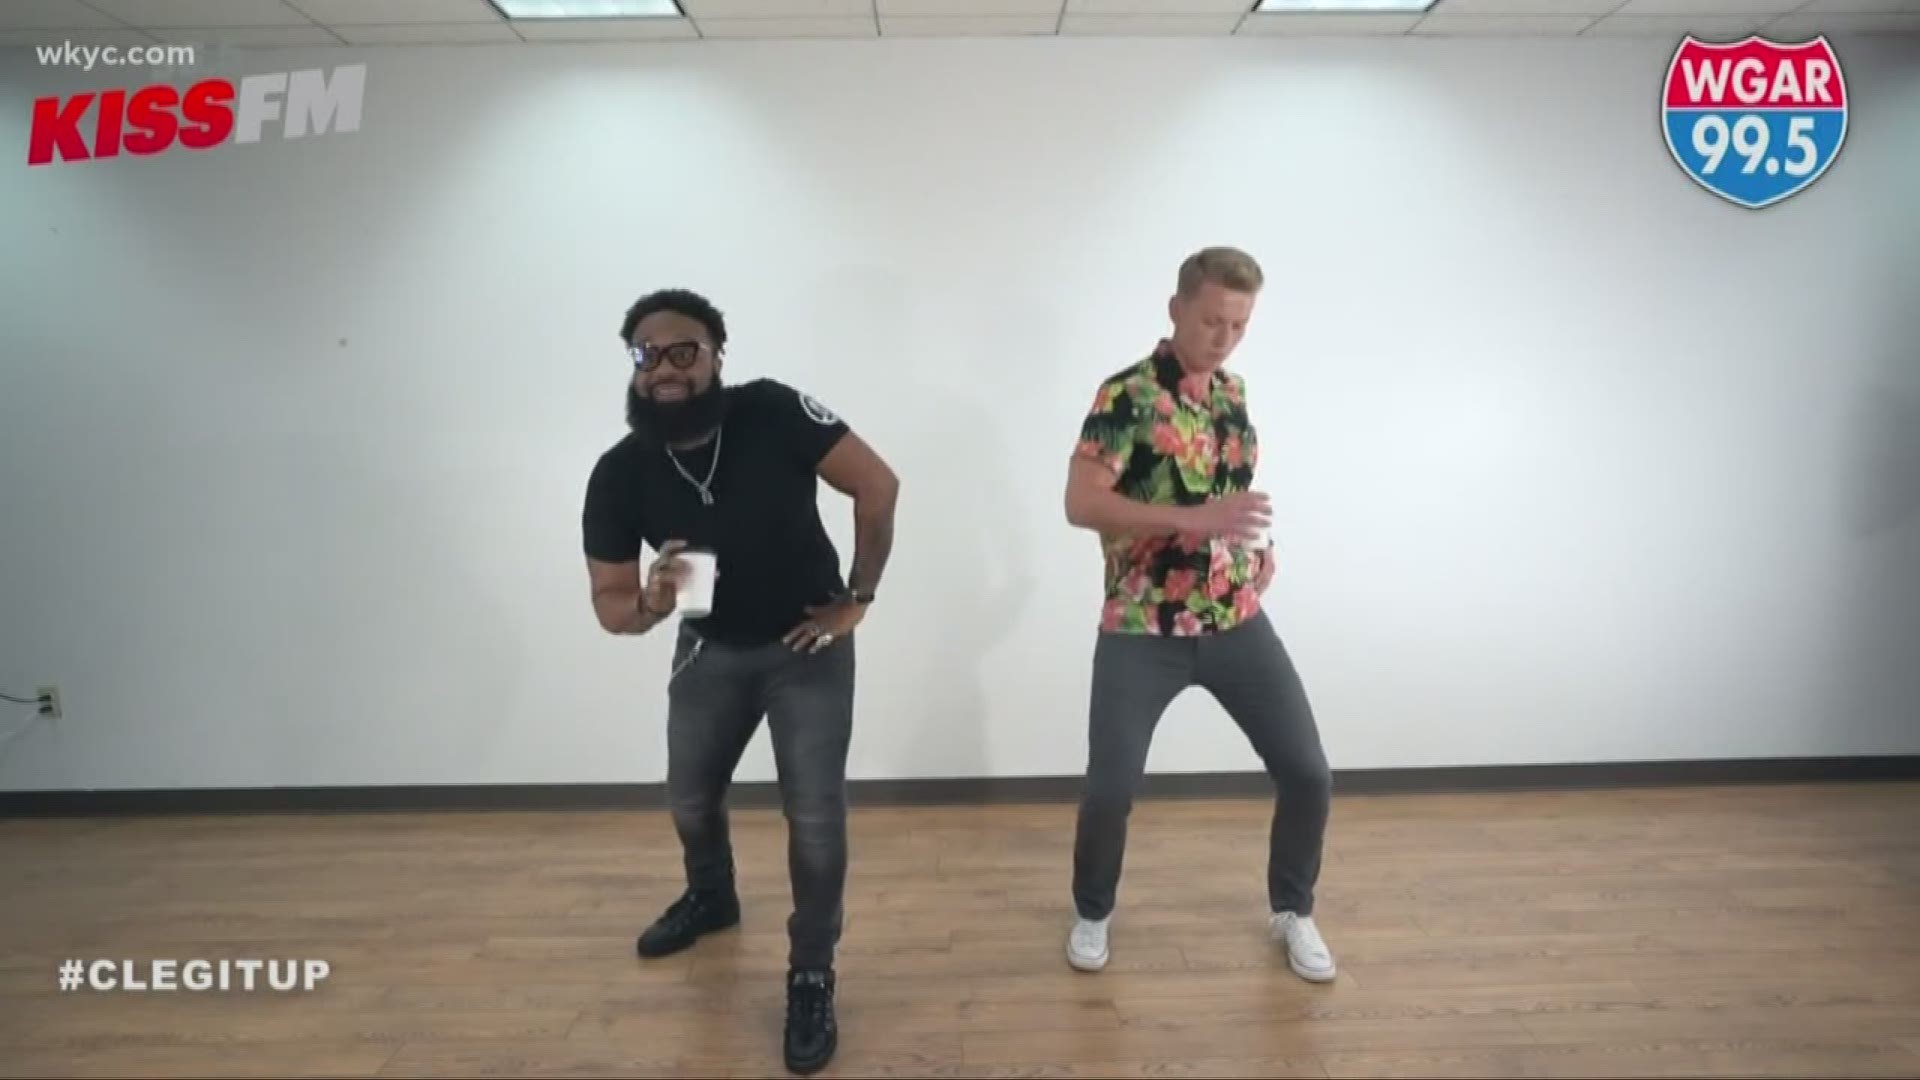 Singer Blanco Brown is a viral sensation, topping charts with his song, 'The Git Up,' as people everywhere mimic his dance in what’s called 'The Git Up Challenge.' He came to Cleveland and taught his now viral dance to some famous Clevelanders at iHeartMedia this week.